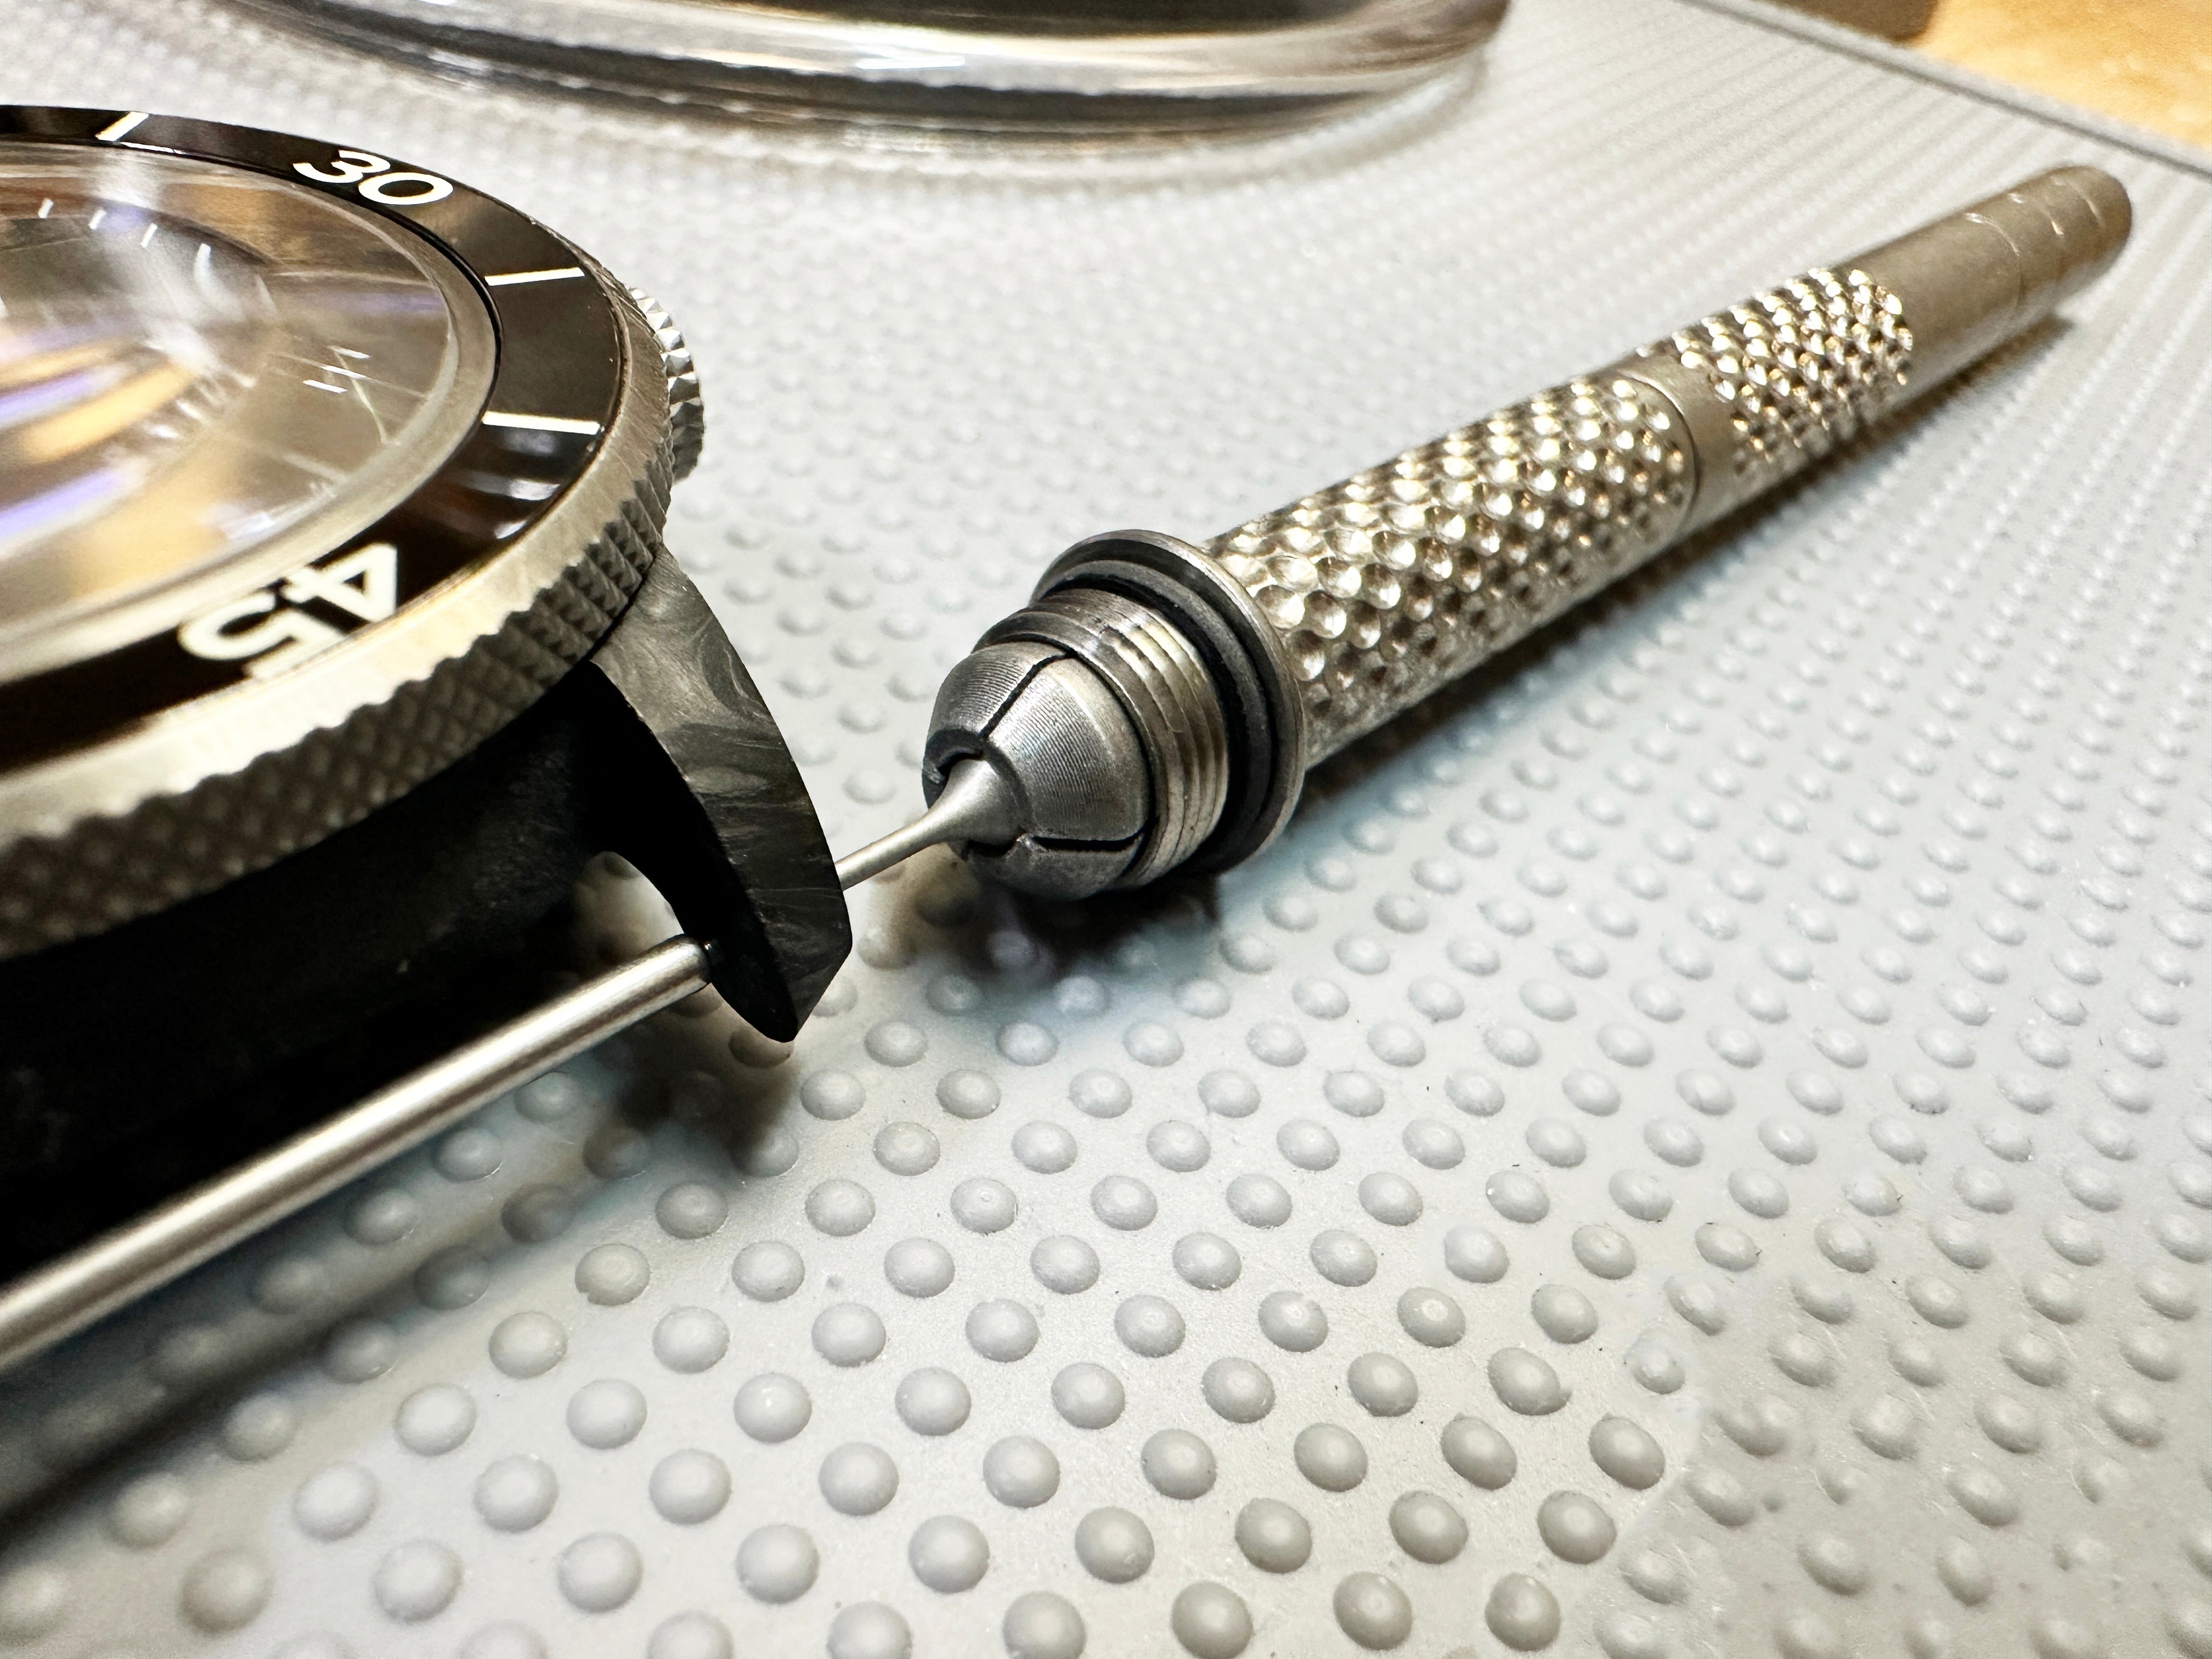 CountyComm Titanium Precision Watchmaker's Tool Collab